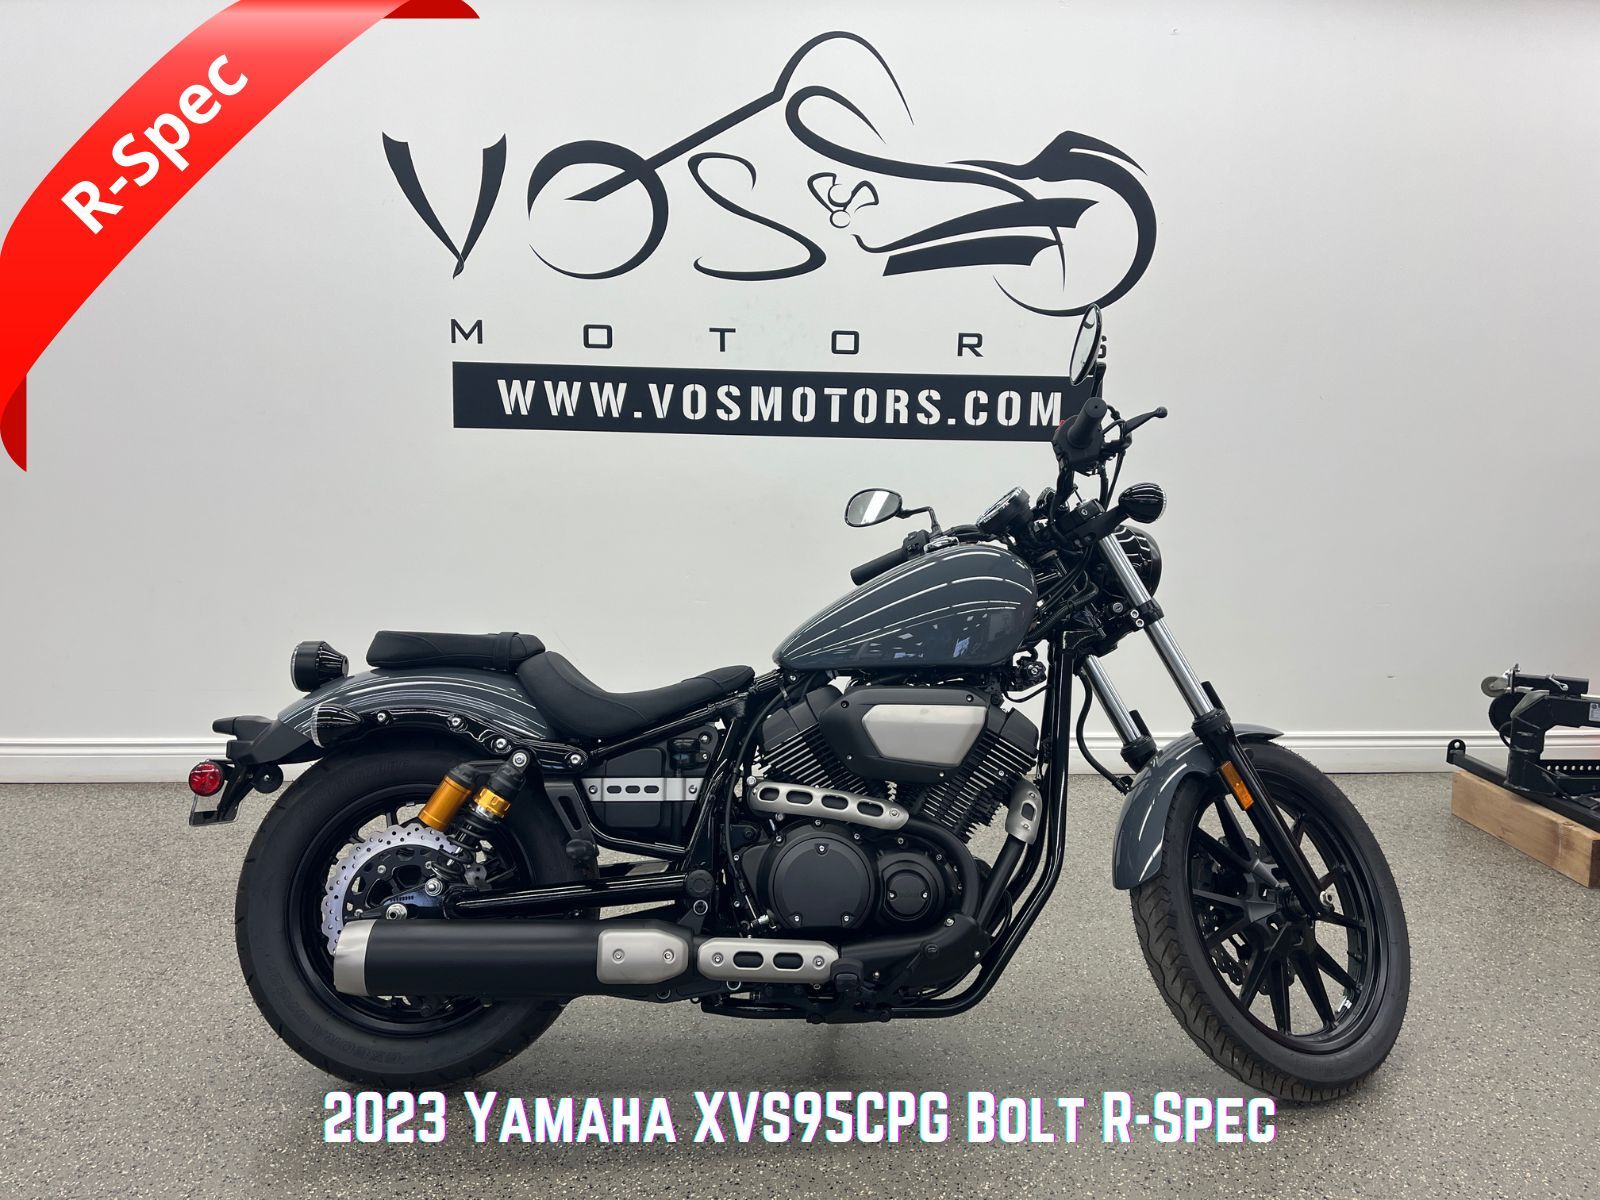 2023 Yamaha XVS95CPG Bolt R-Spec - V5836 - -No Payments for 1 Year**